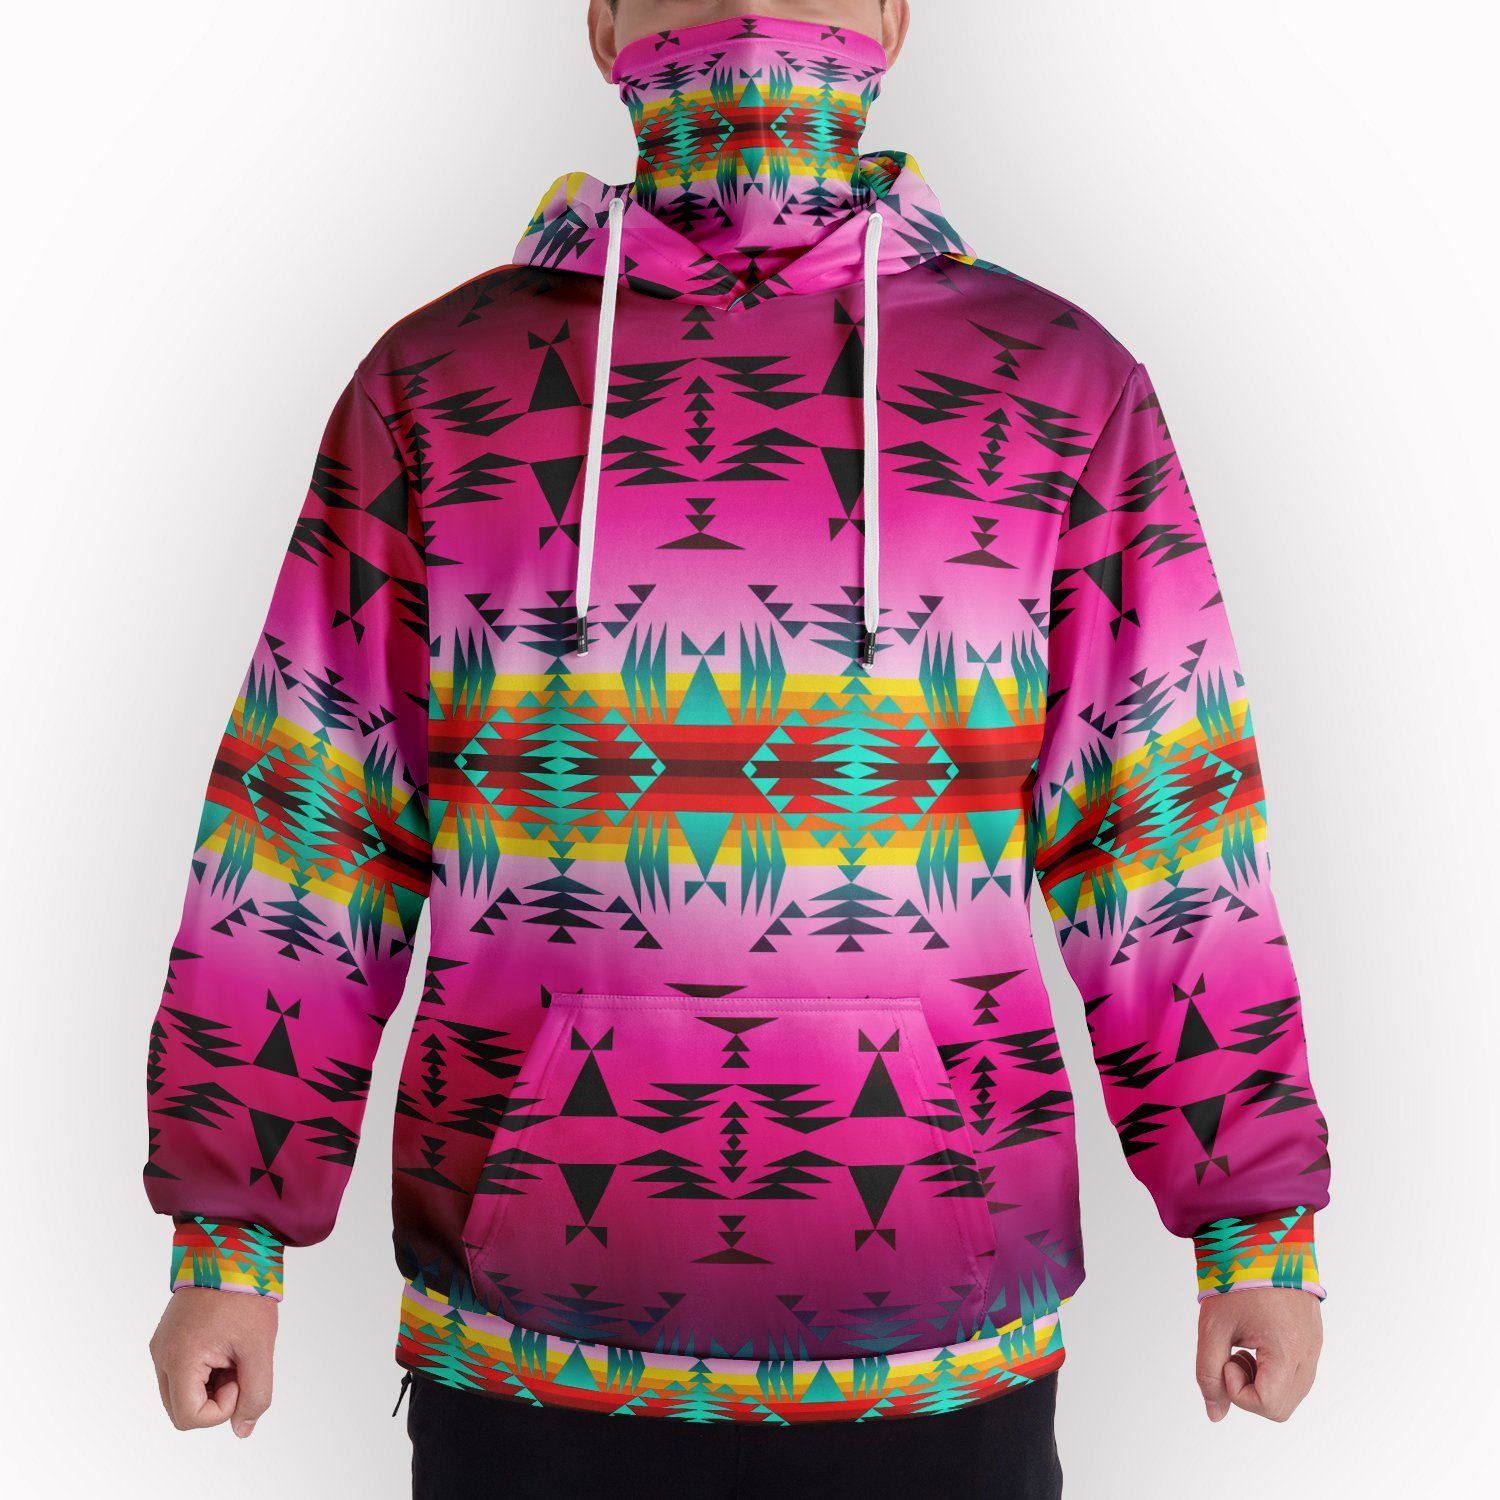 Between the Cascades Mountains Hoodie with Face Cover 49 Dzine 